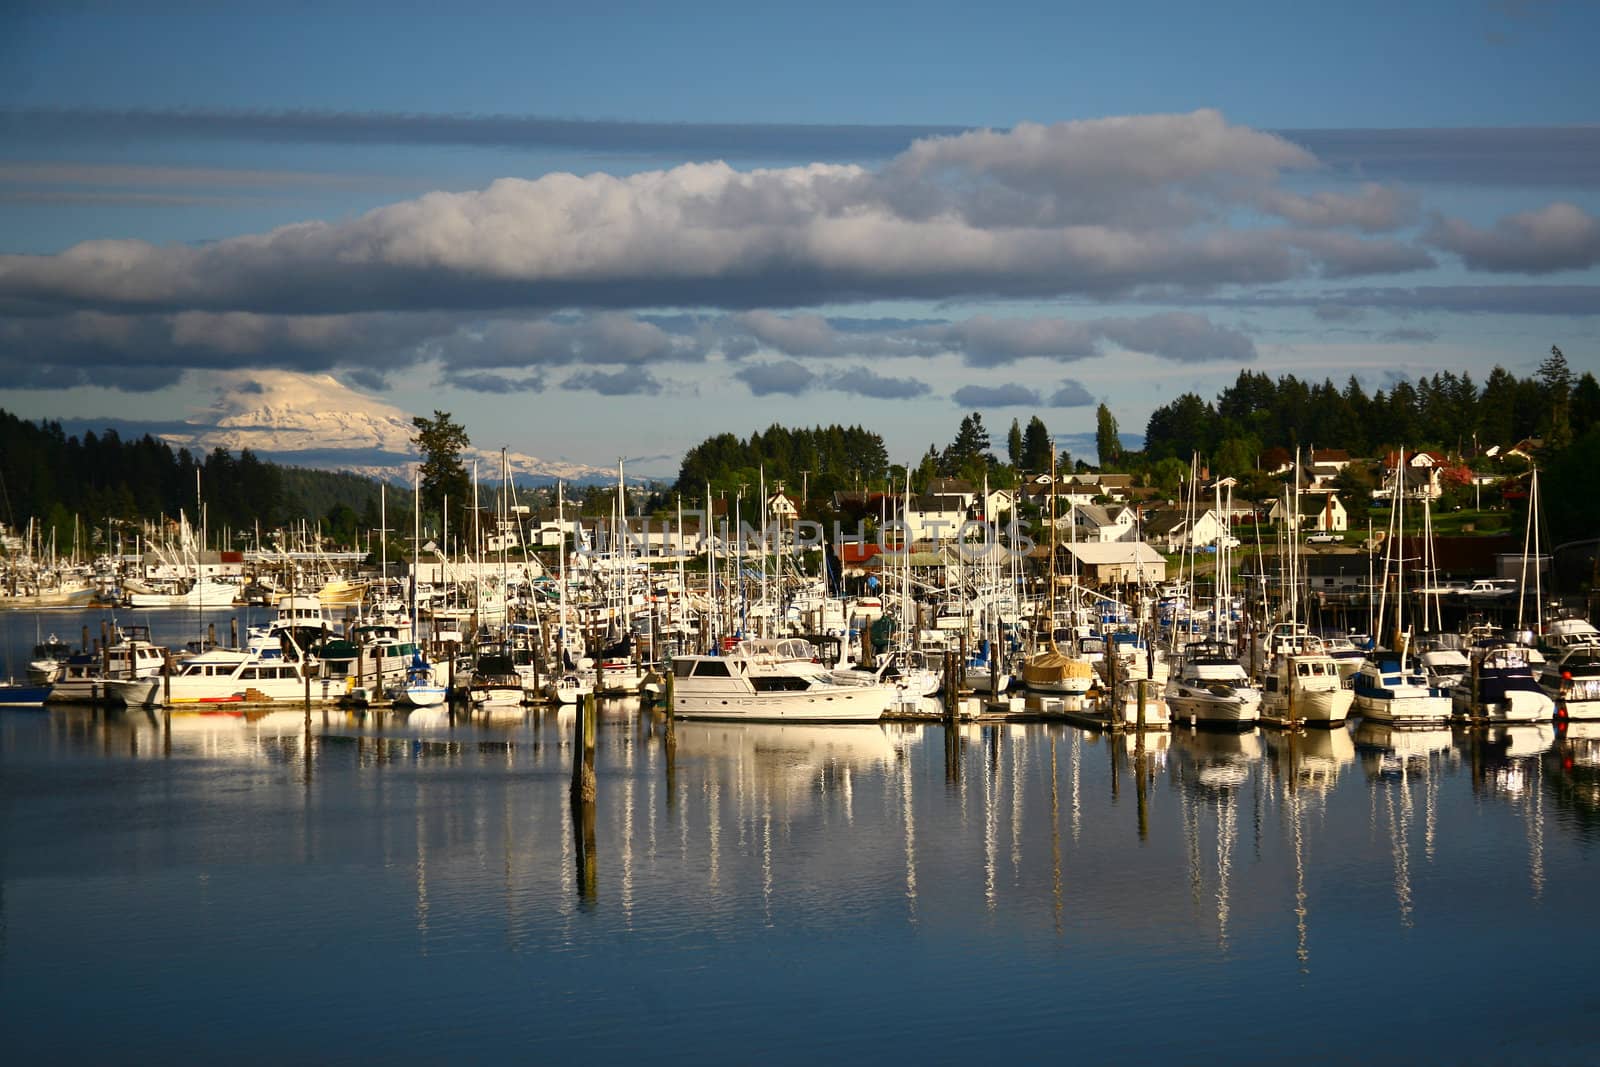 Gig Harbor boat marina with view of Mount Rainer







Gig Harbor Boat Marina in Washington